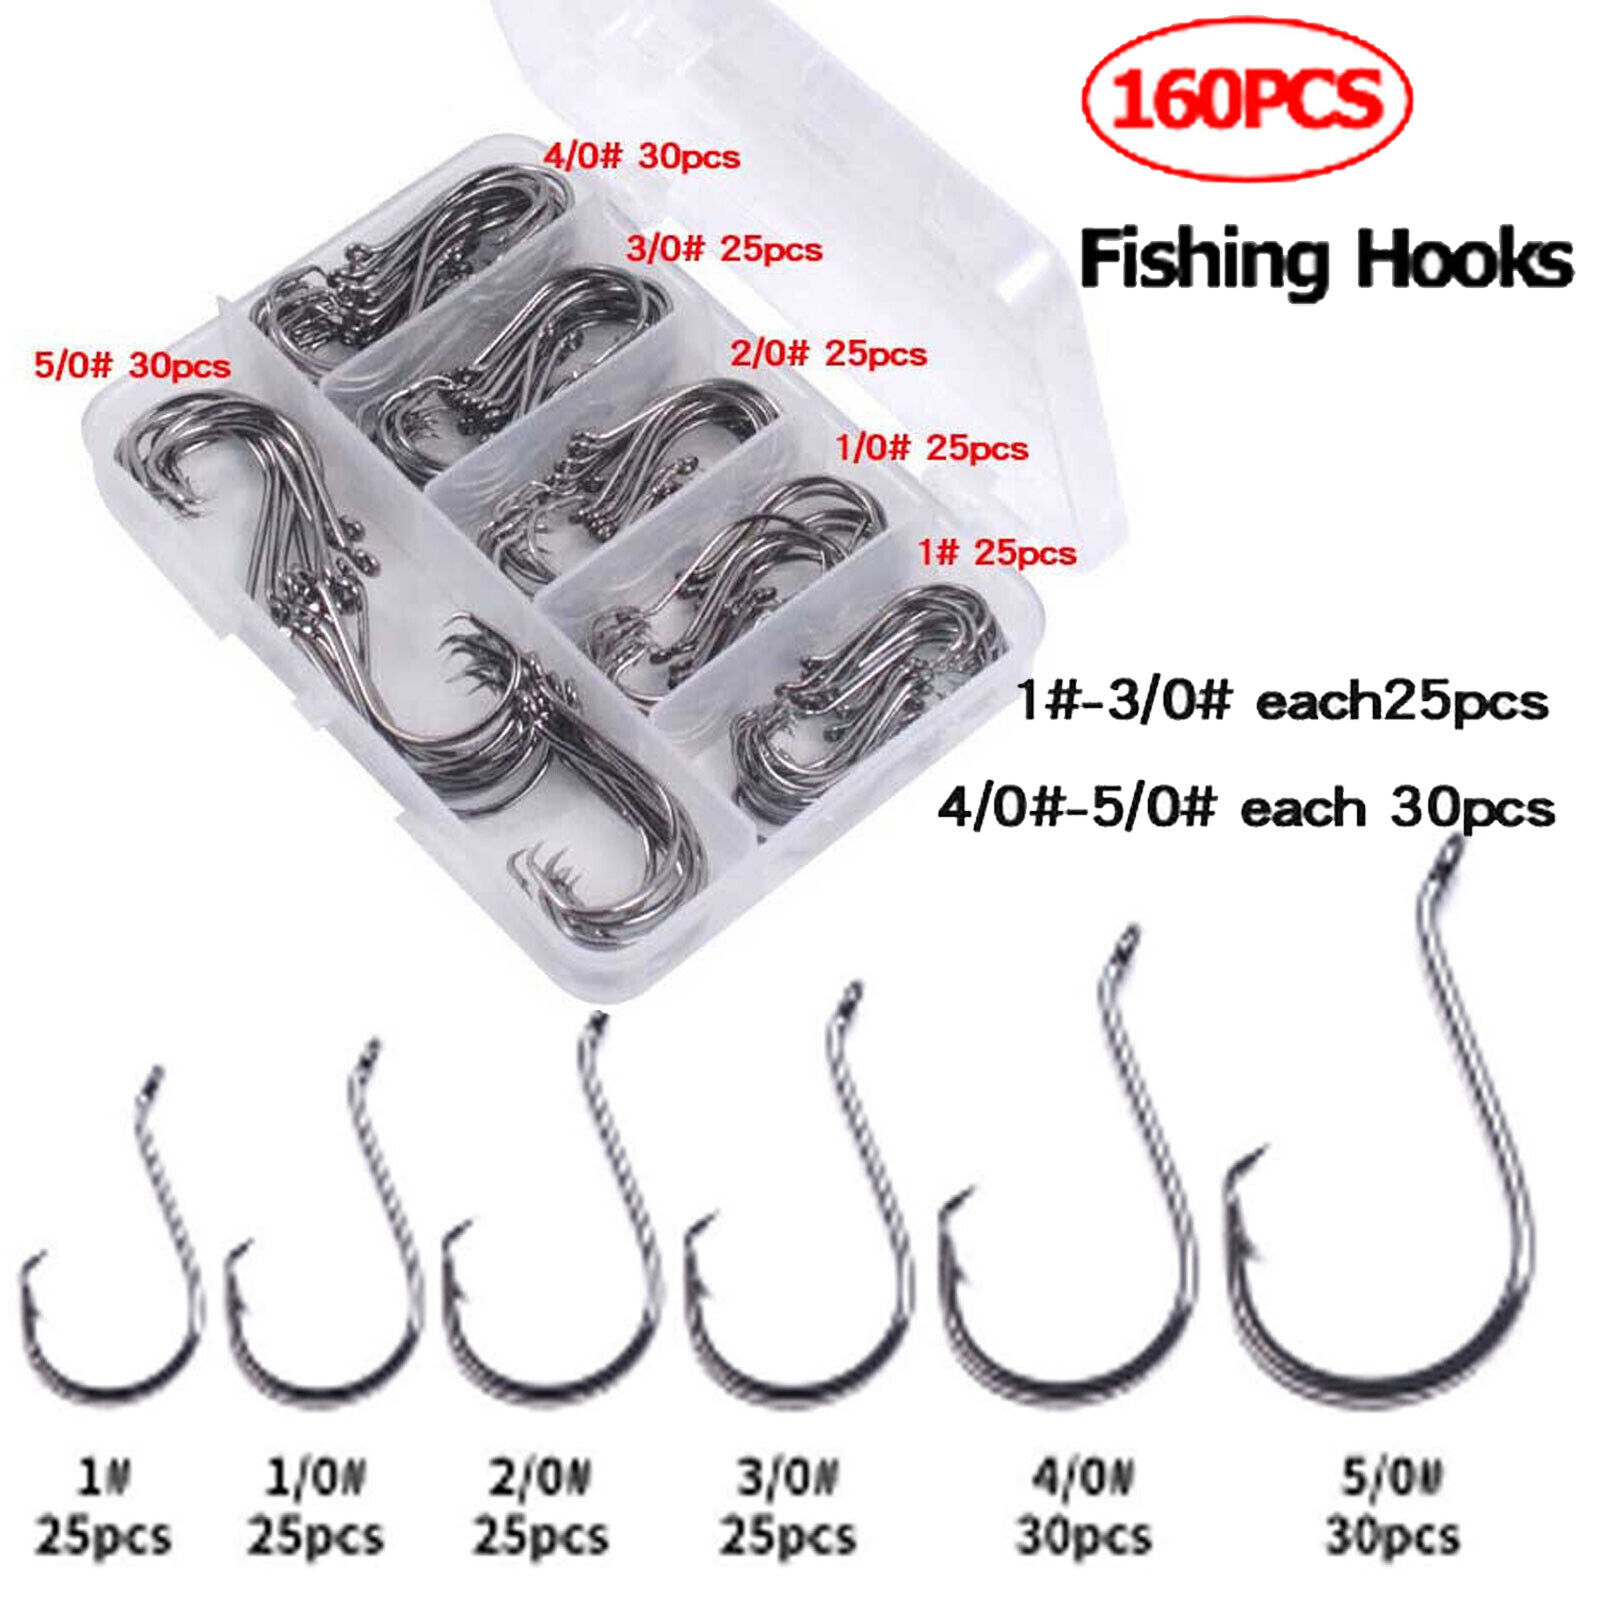 160 Offset Circle Fishing HOOKS W/ Box Black High Carbon Steel Sizes #1-5/0 SNS Does Not Apply